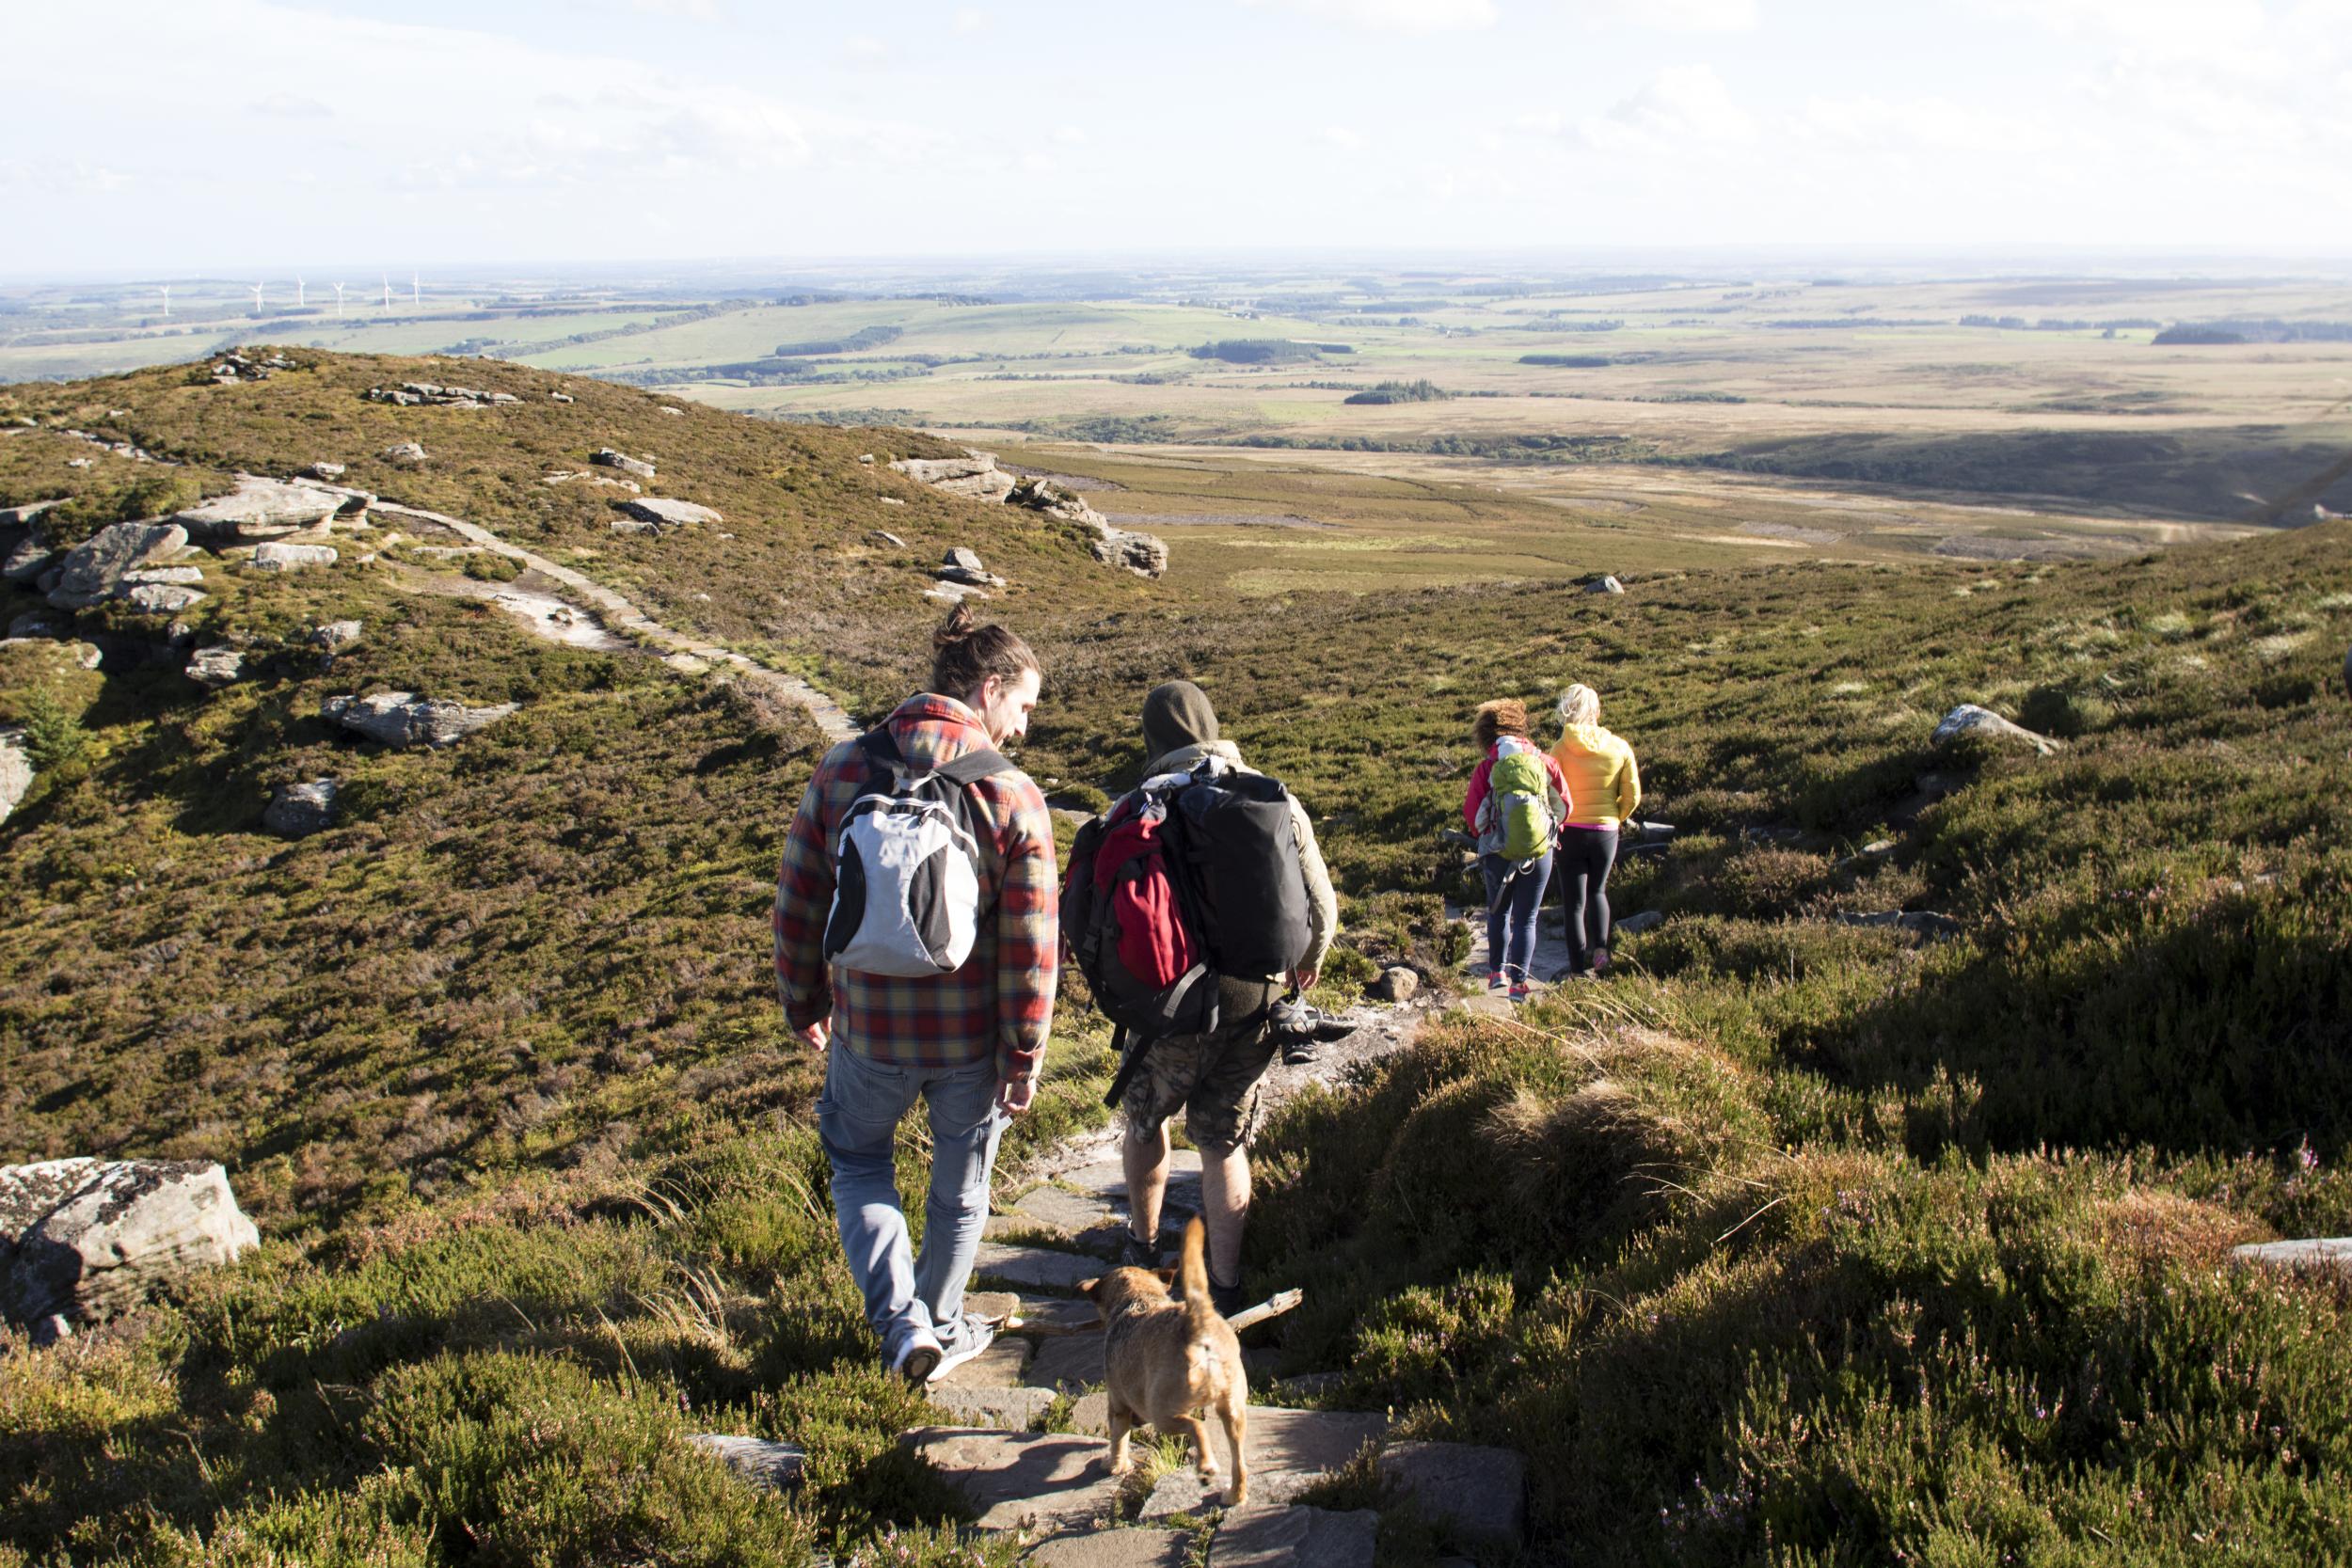 Walking challenges seriously affect both local inhabitants and the wild scenery that National Parks were set up to protect